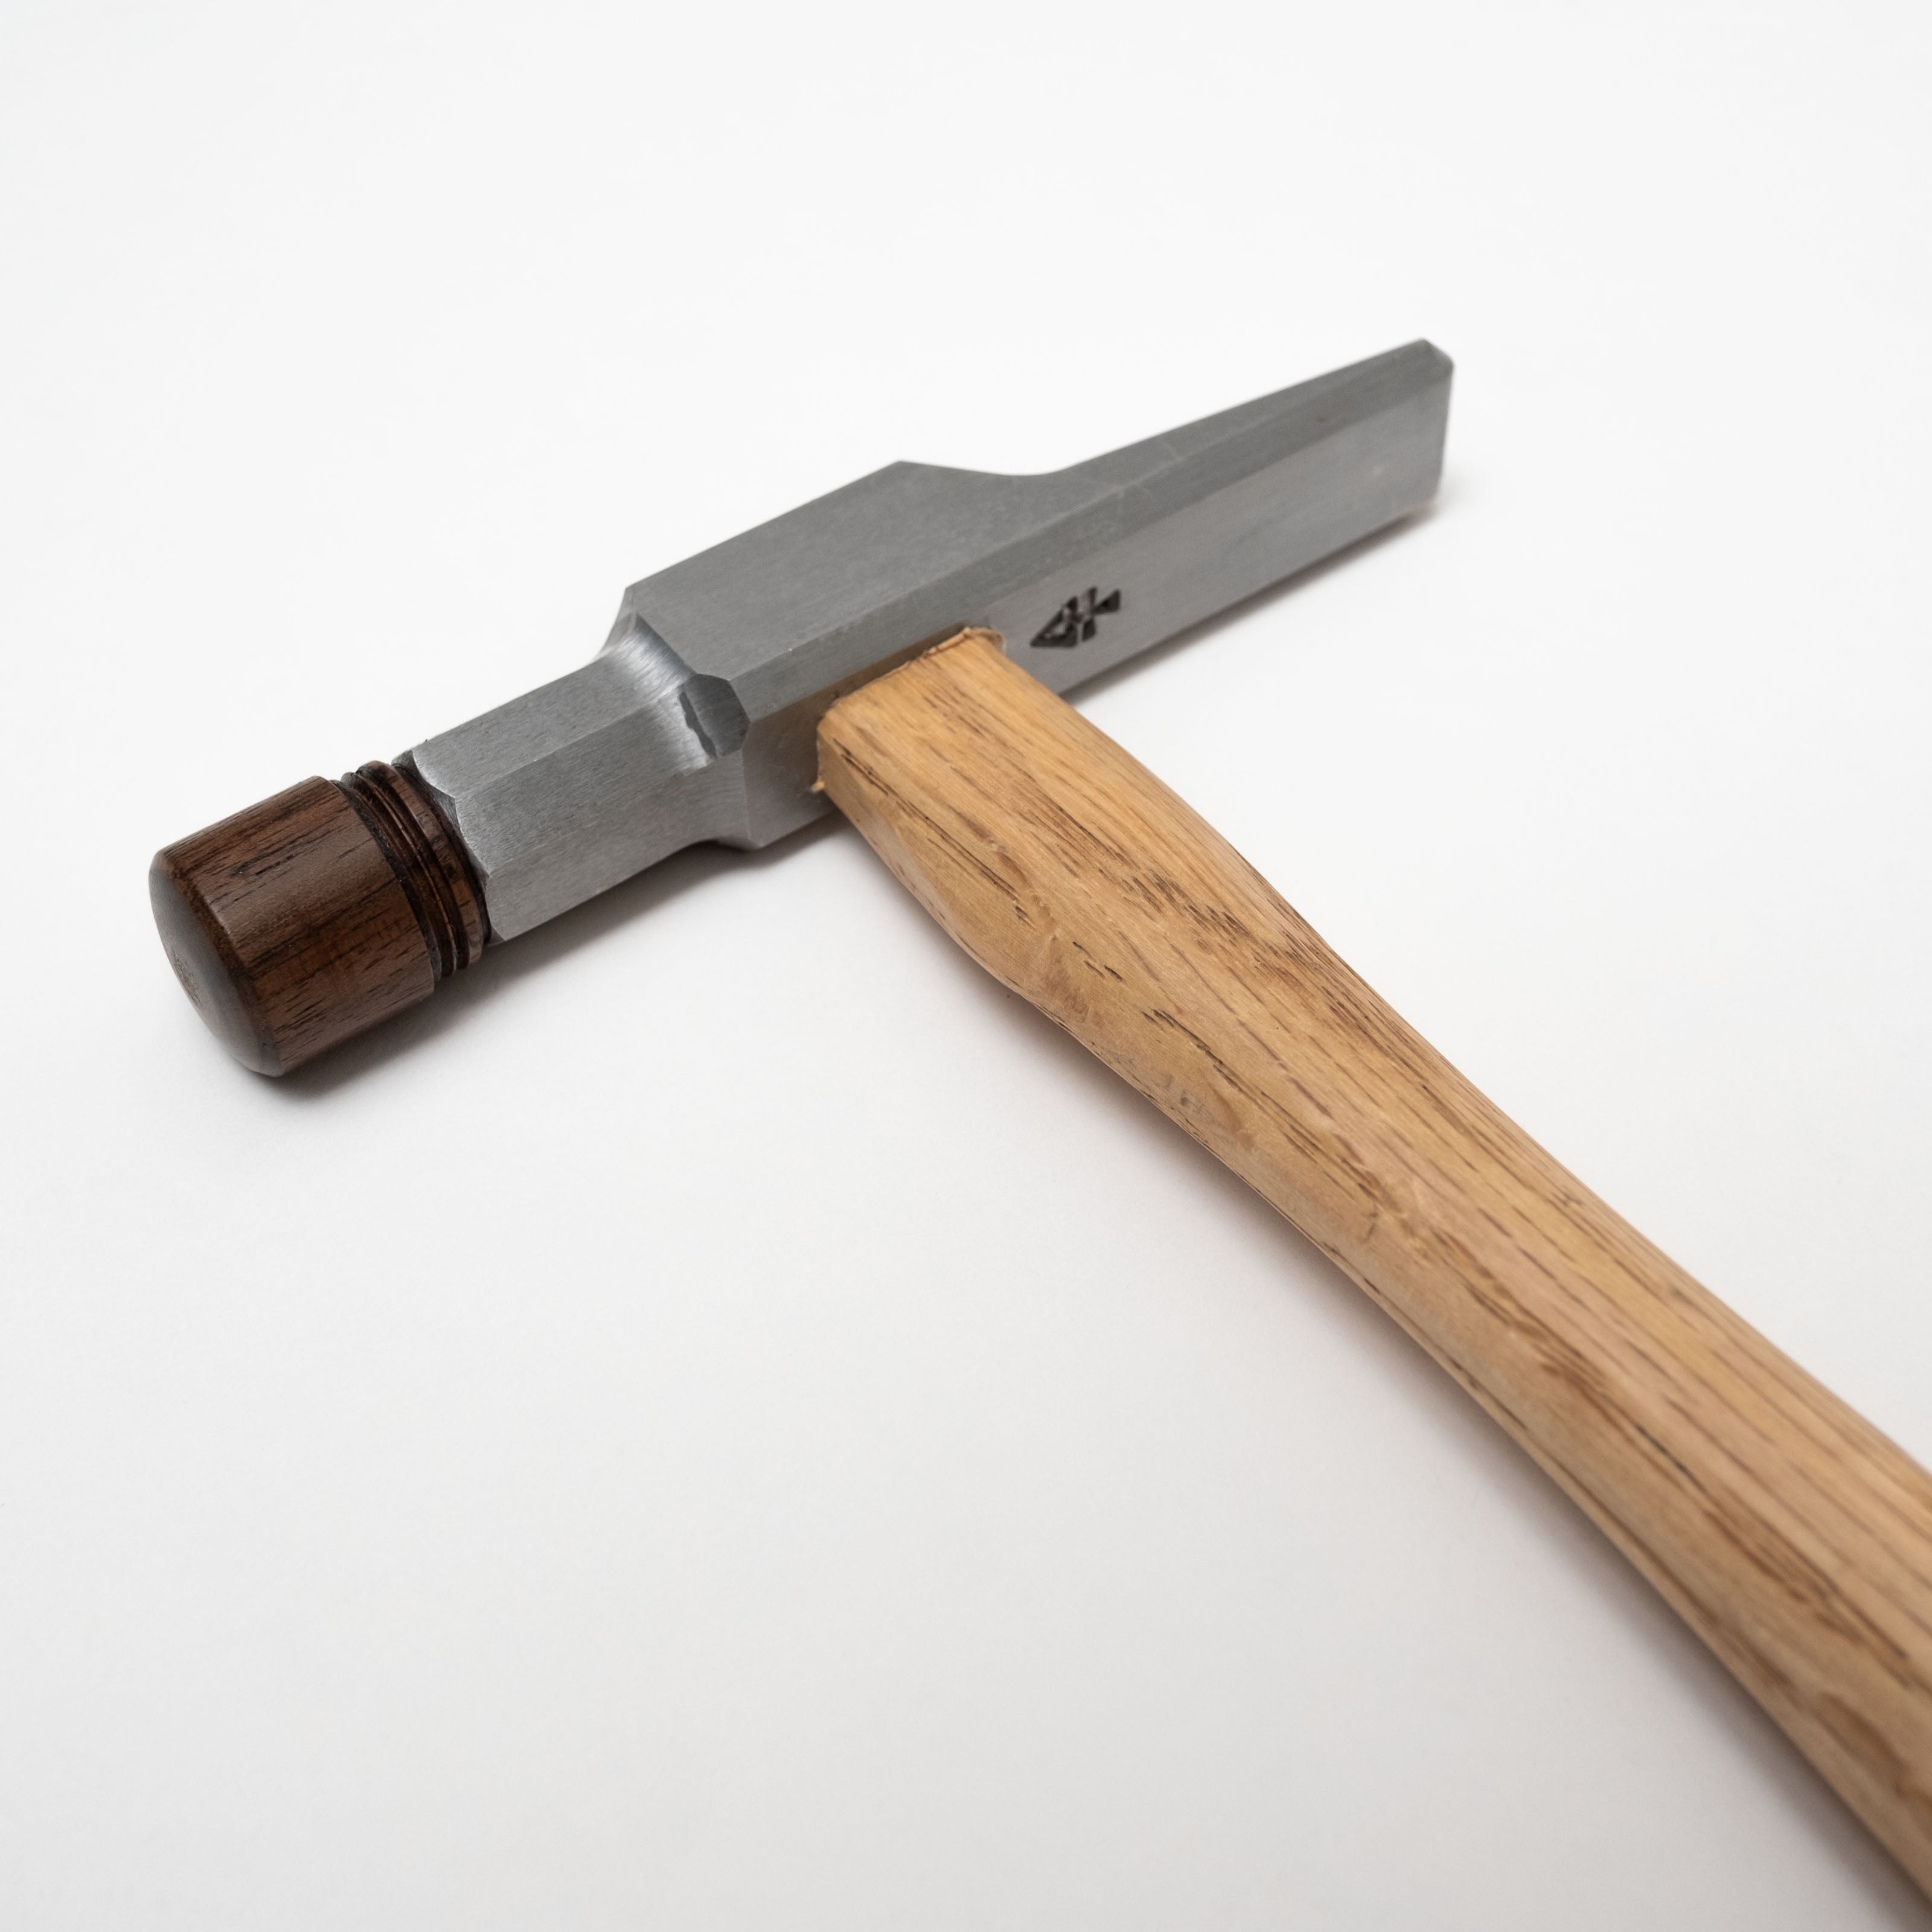 Daed Toolworks London Pattern Hammer